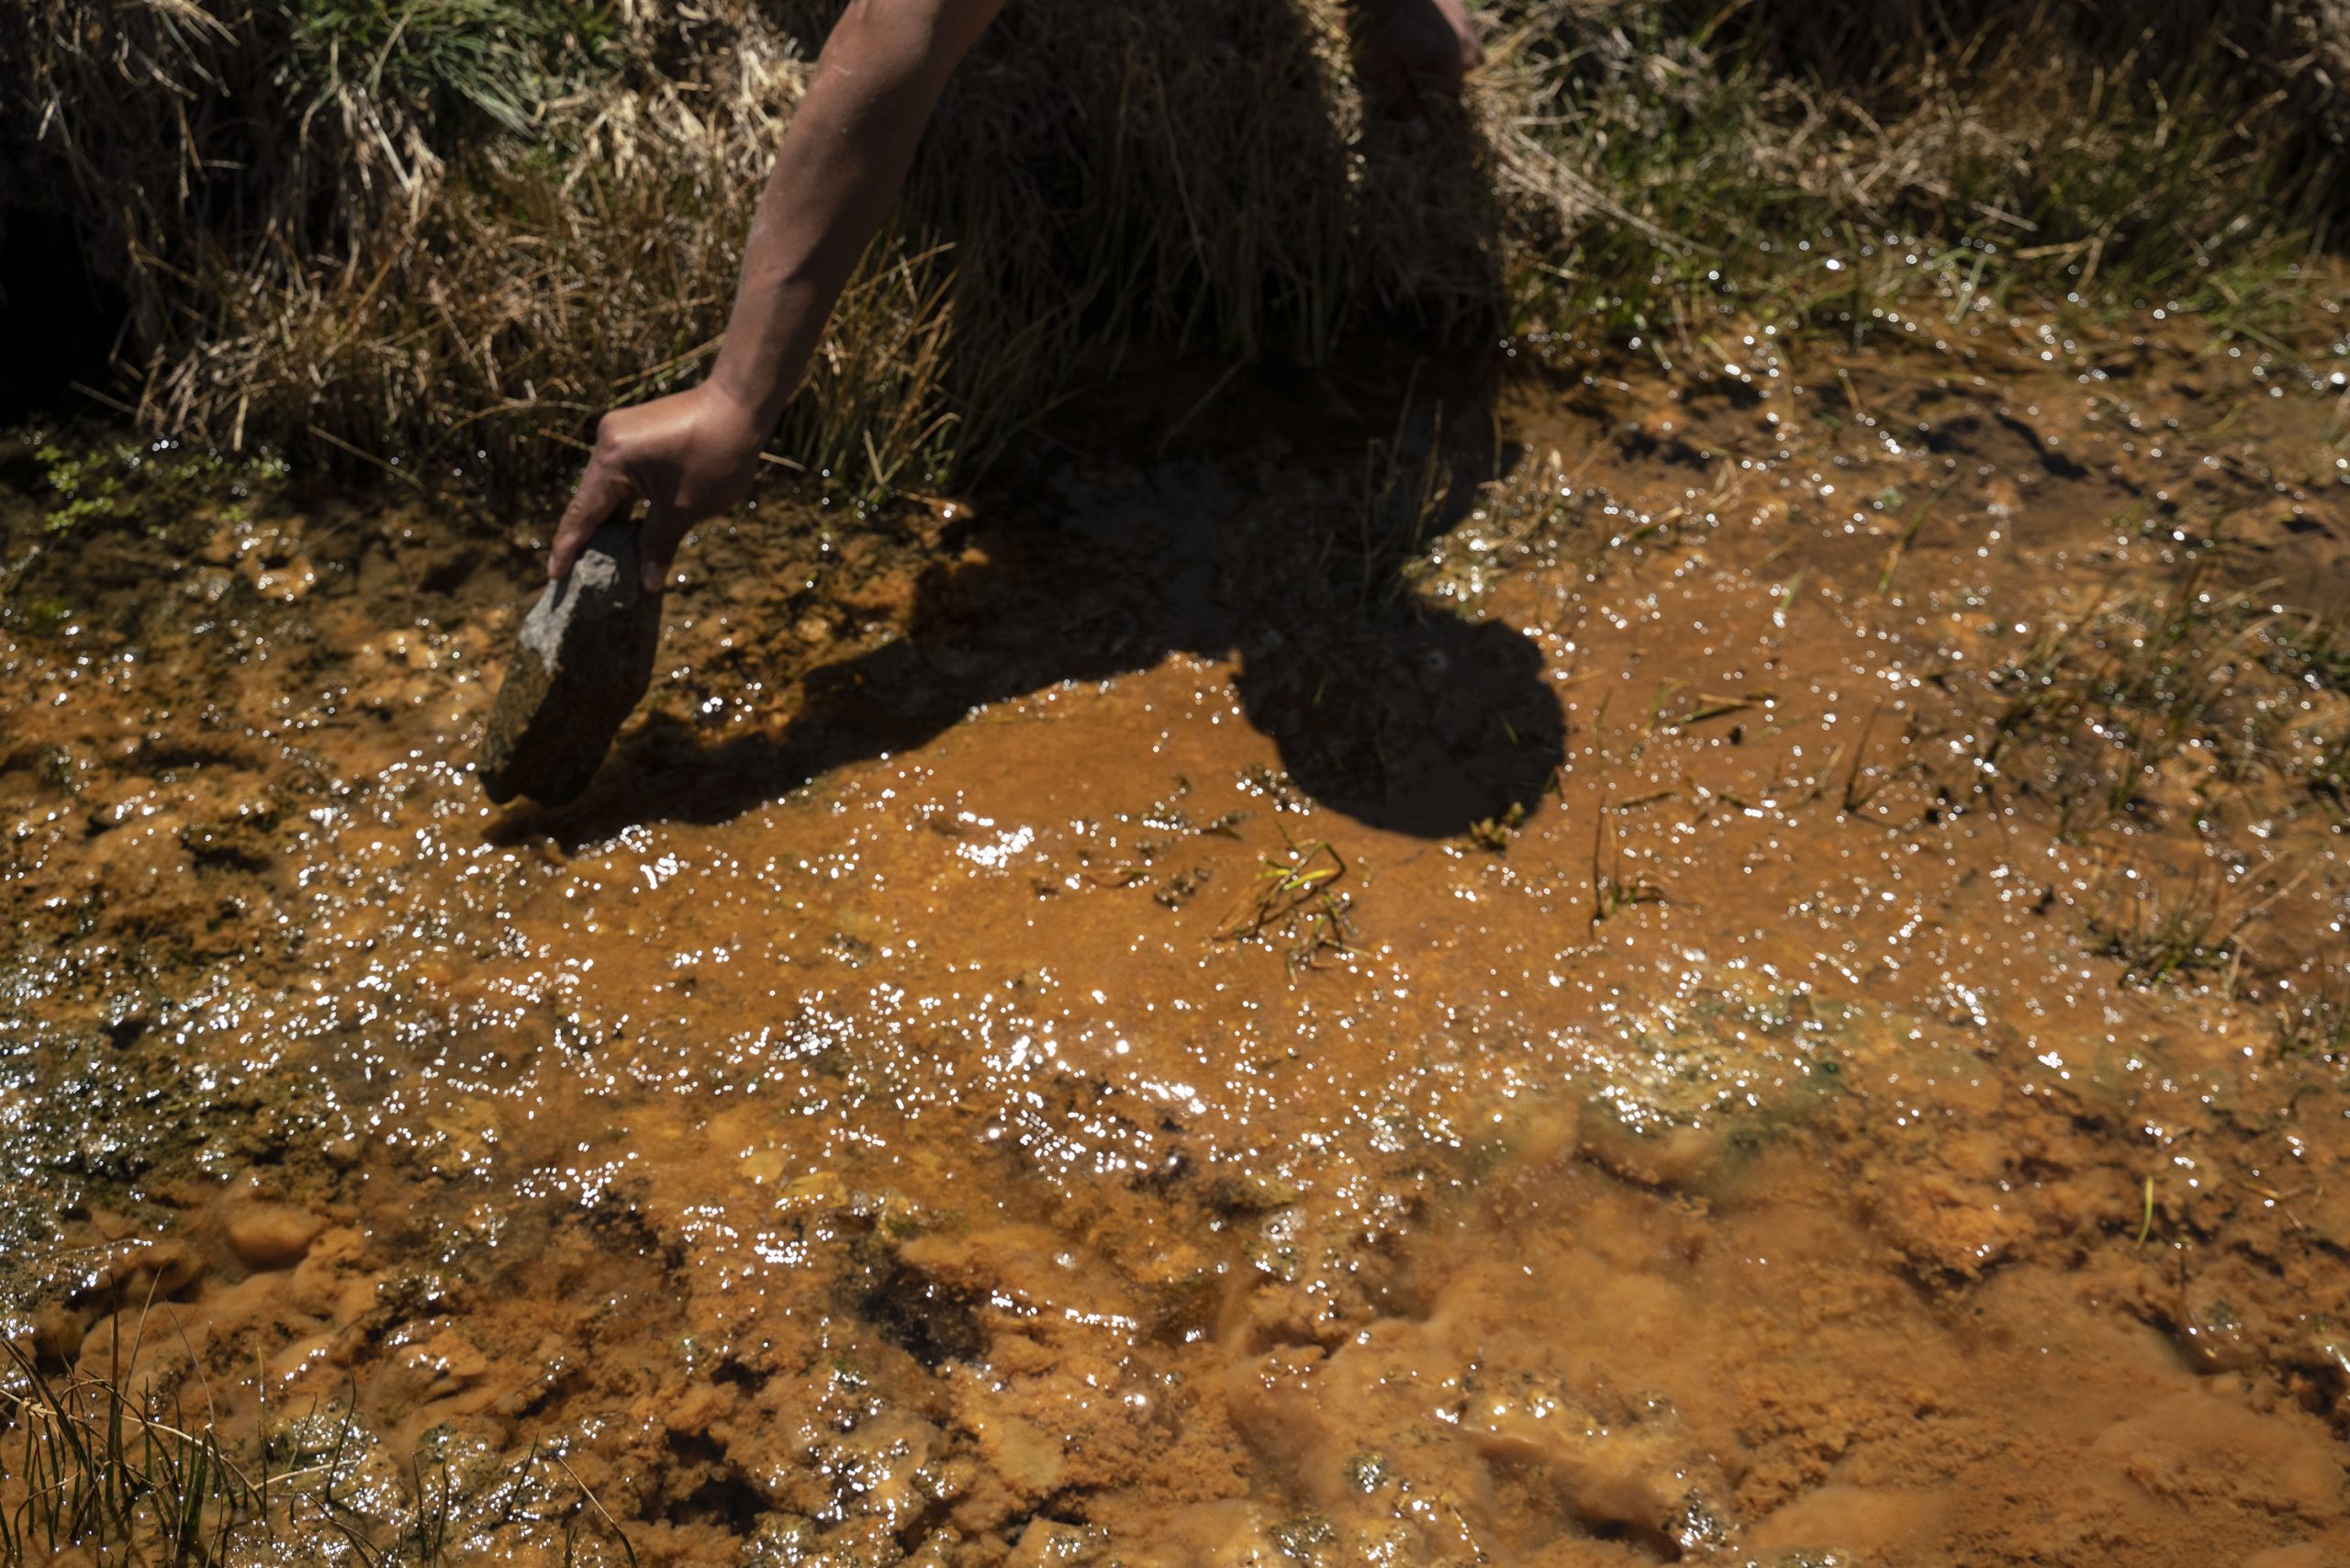 A person shows a contaminated water source in Peru's mining corridor